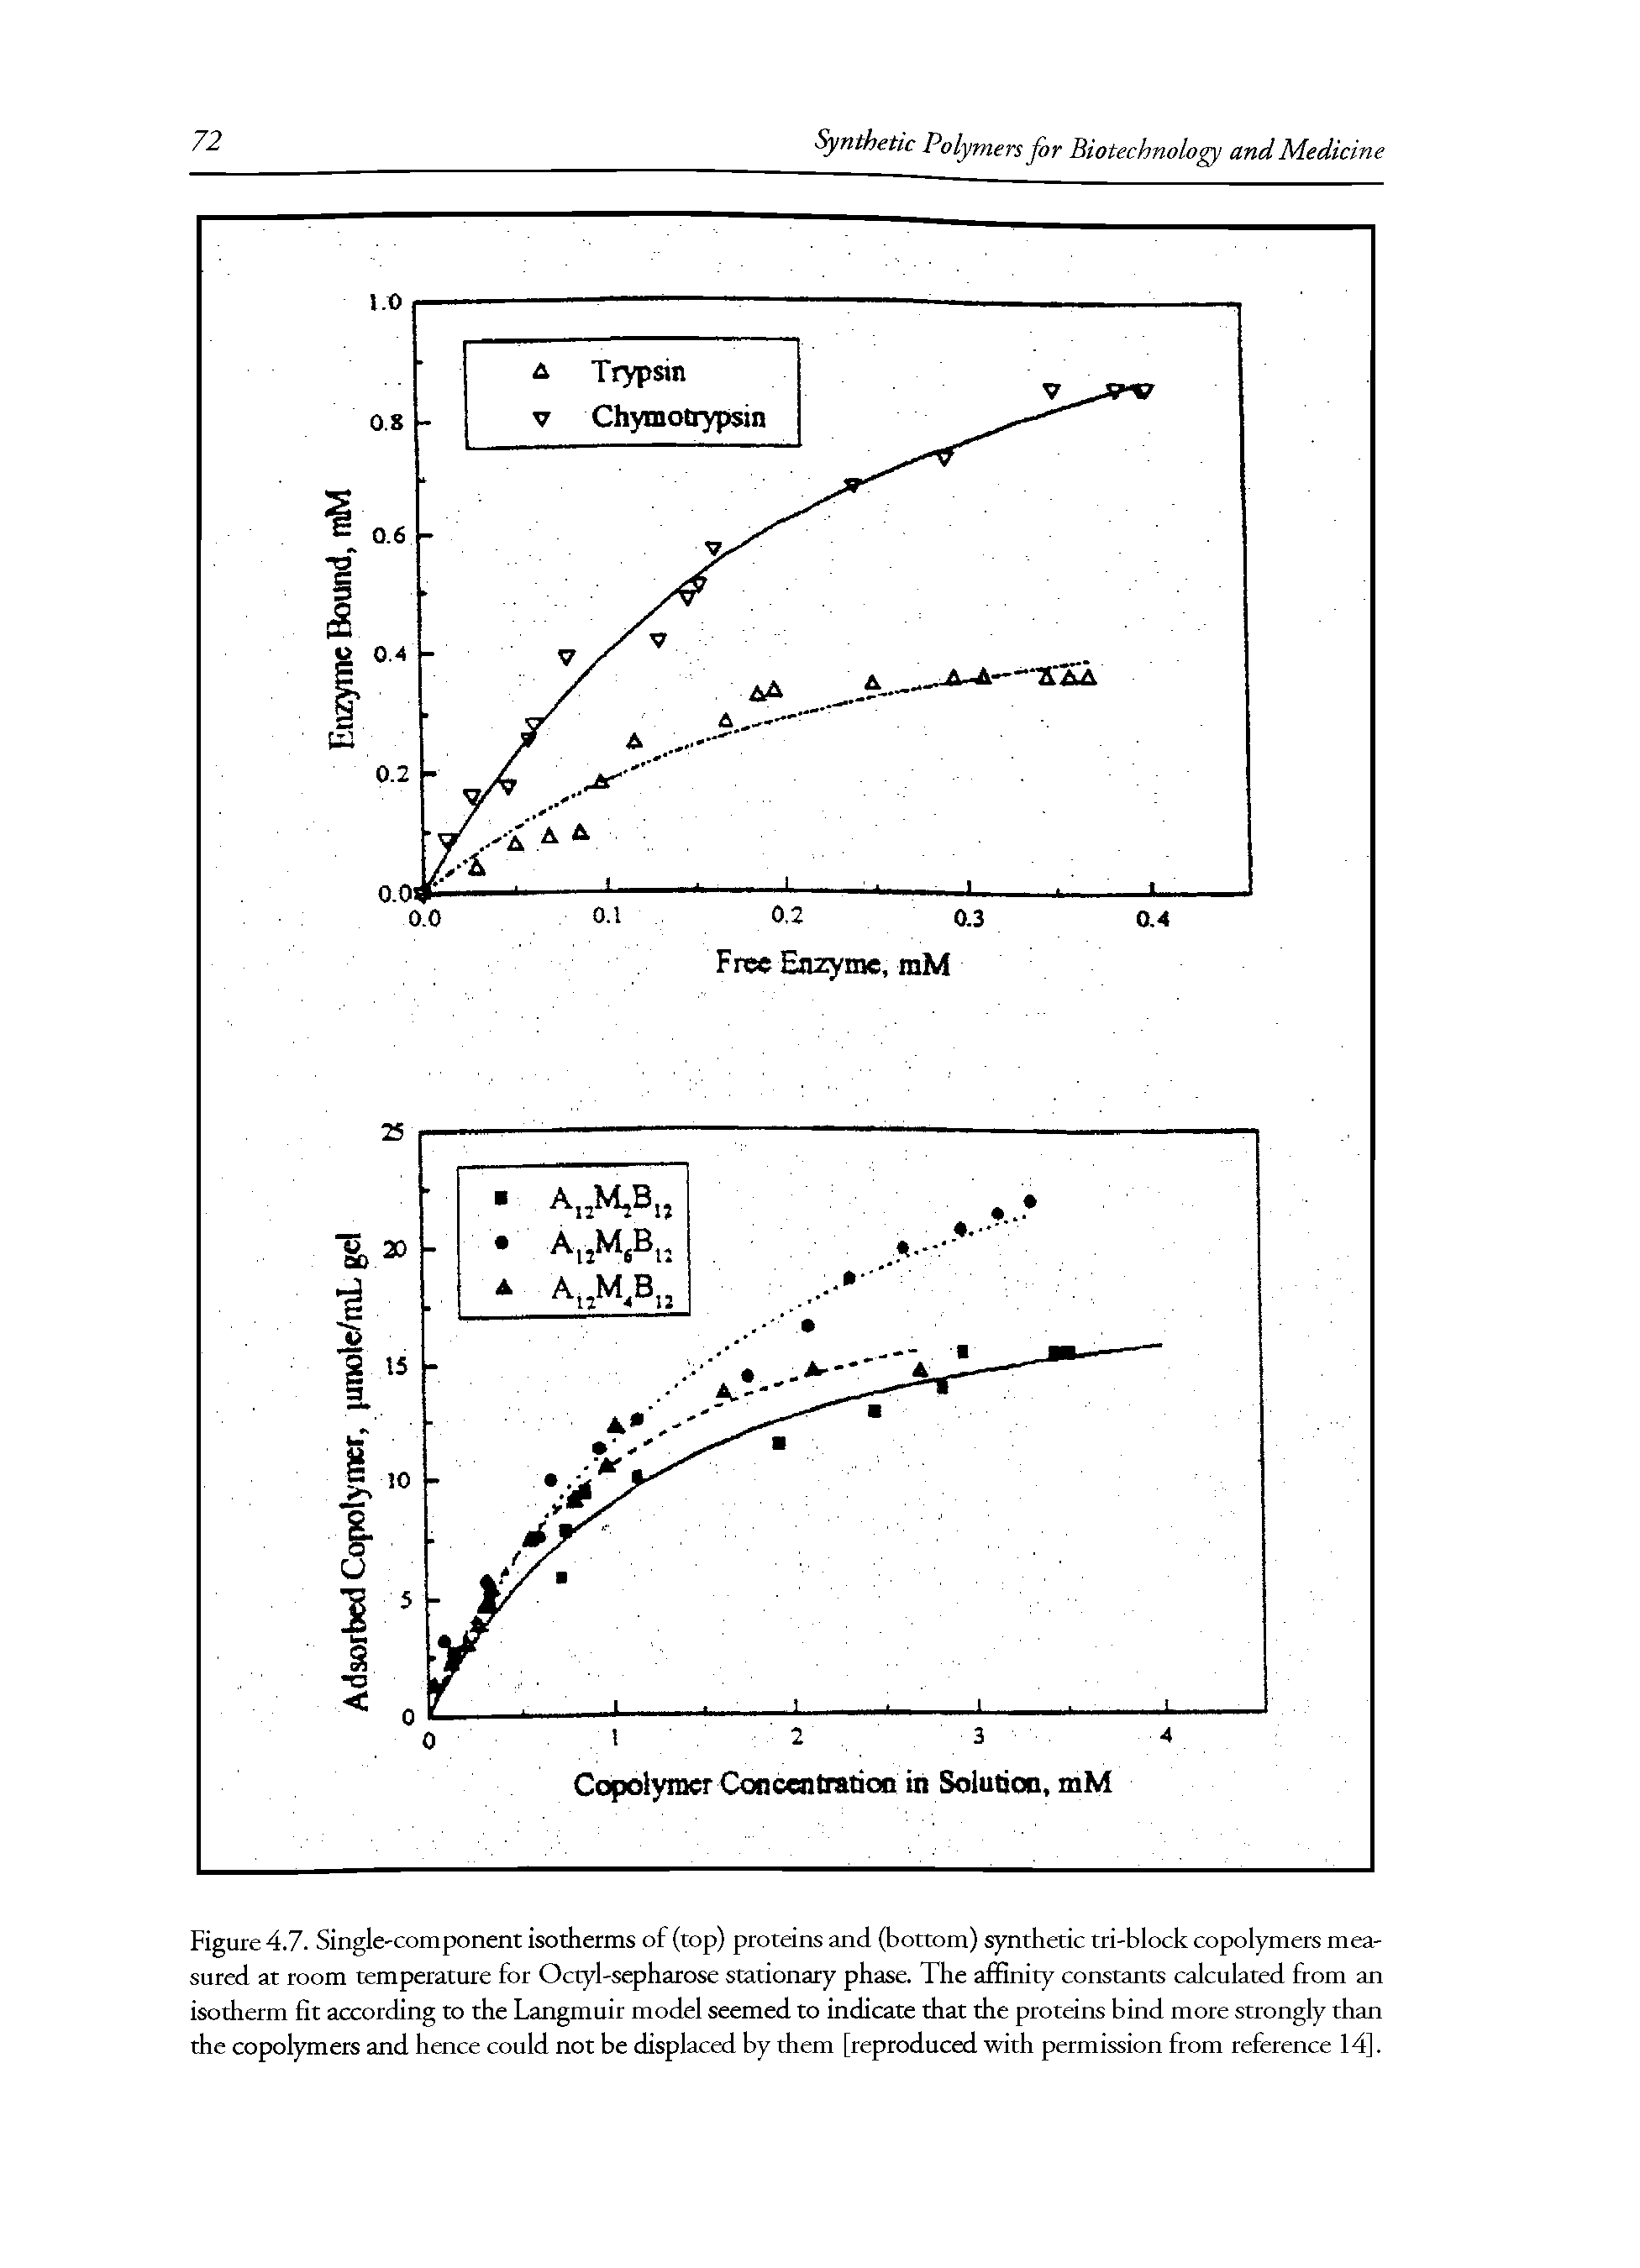 Figure 4.7. Single component isotherms of (top) proteins and (bottom) synthetic tri-block copolymers measured at room temperature for Octyl-sepharose stationary phase. The affinity constants calculated from an isotherm fit according to the Langmuir model seemed to indicate that the proteins bind more strongly than the copolymers and hence could not be displaced by them [reproduced with permission from reference 14].